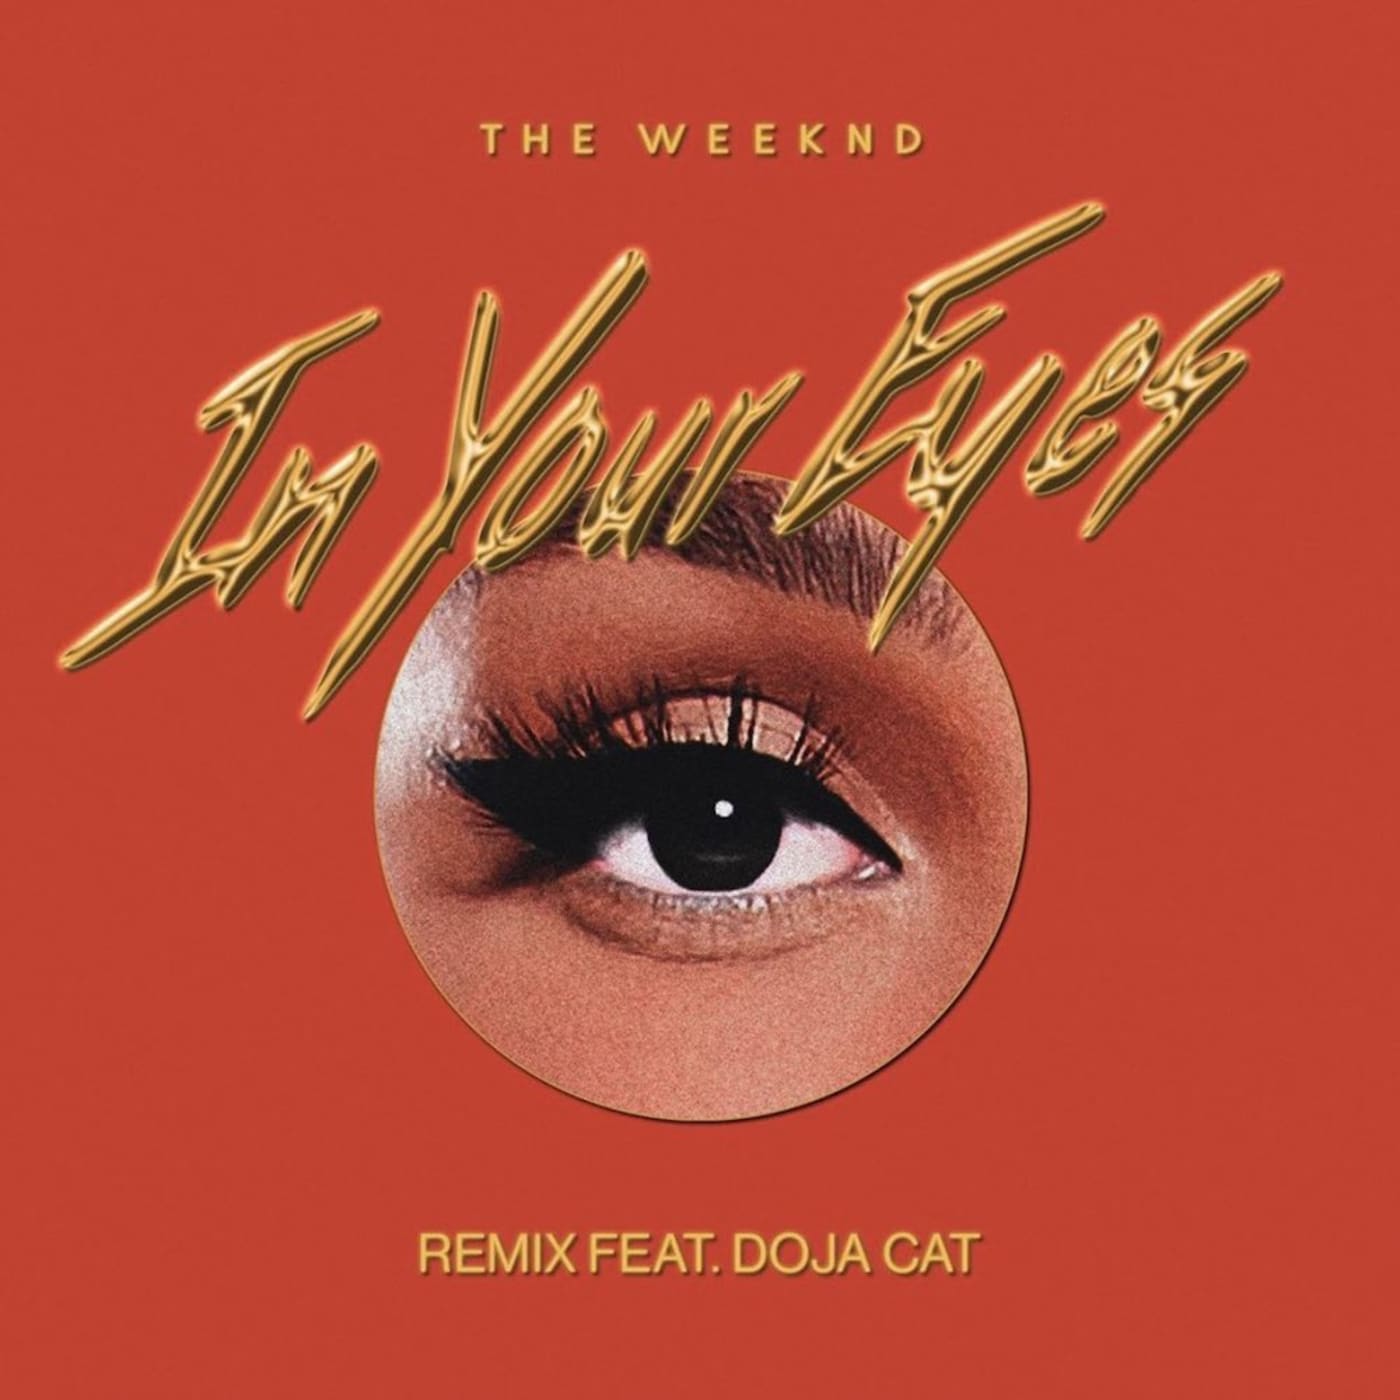 The Weeknd "In Your Eyes" remix f/ Doja Cat